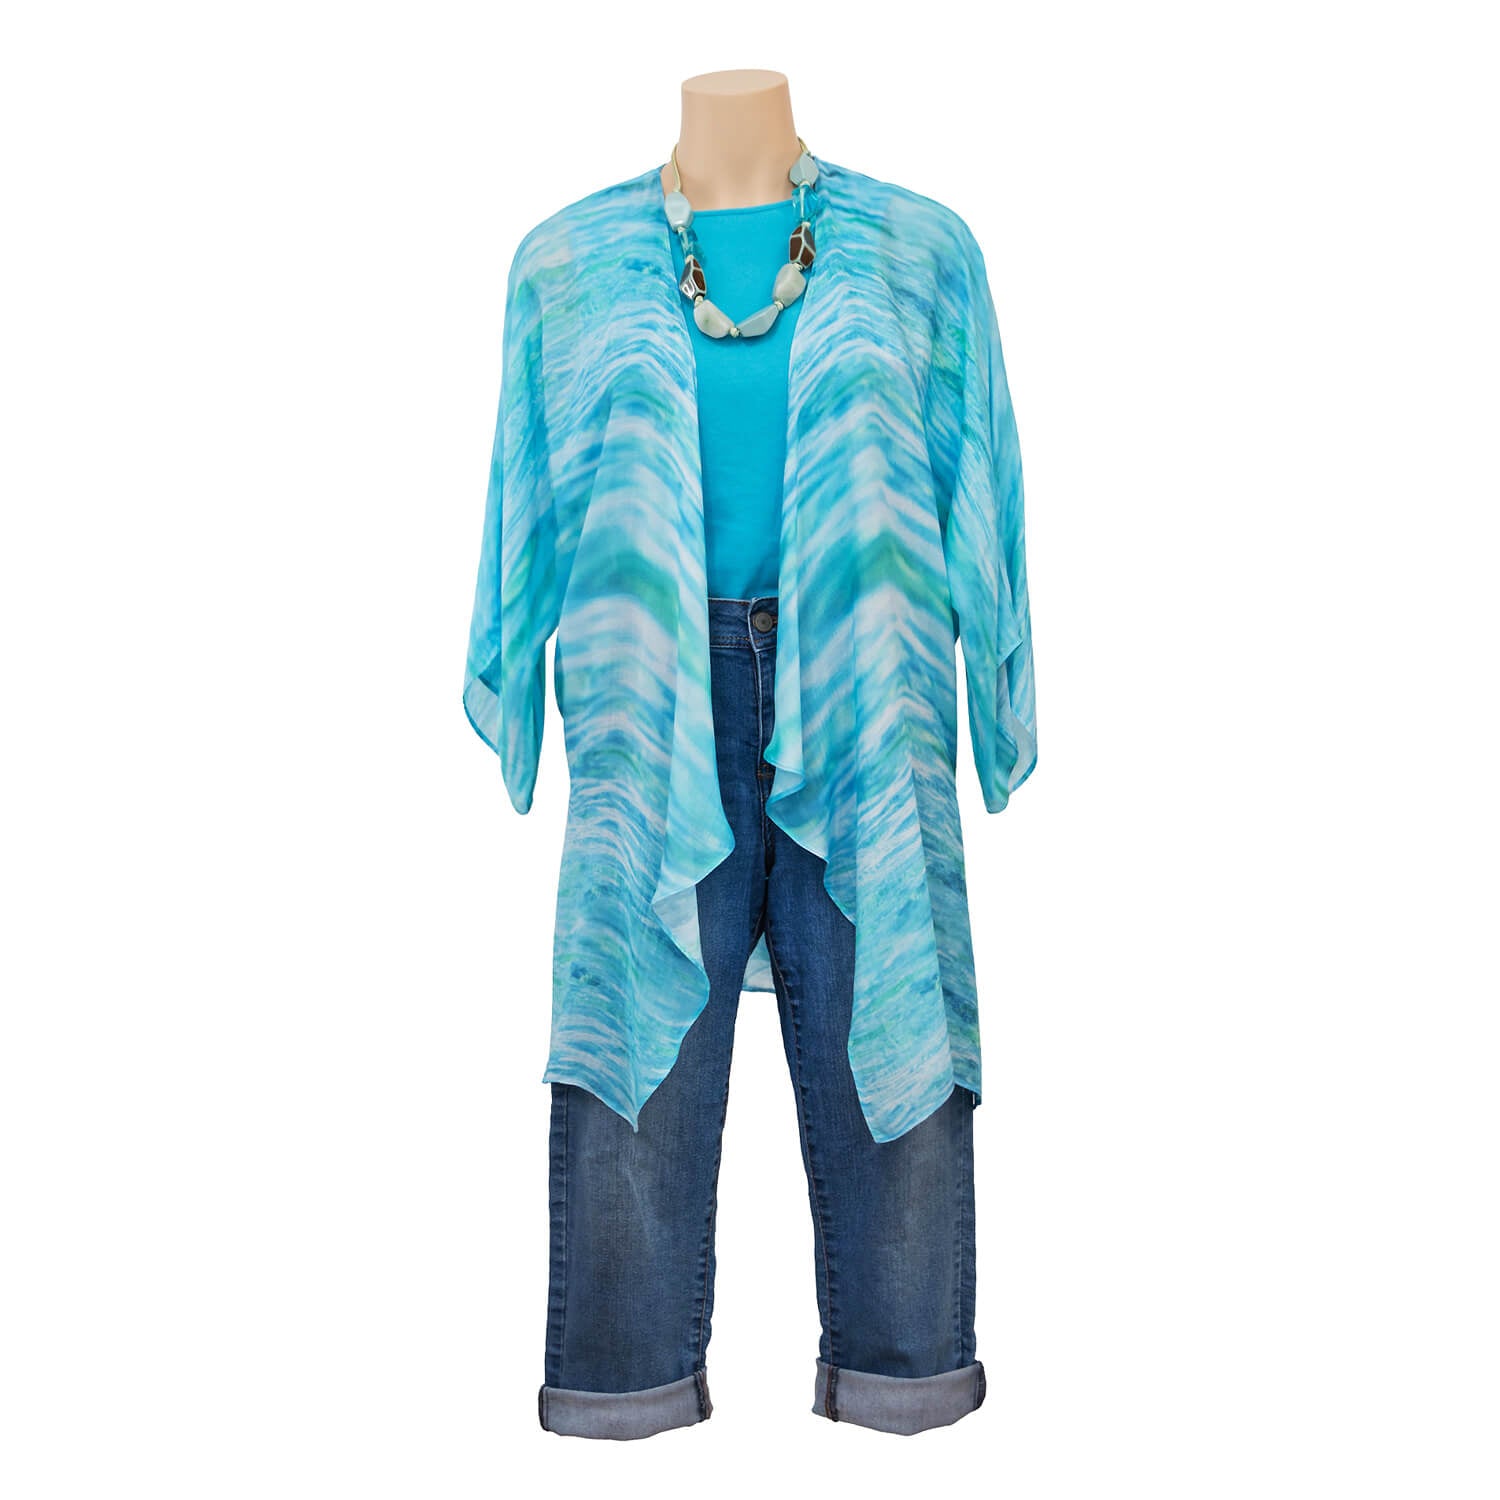 florida waterfall jacket with aqua top and jeans by seahorse silks